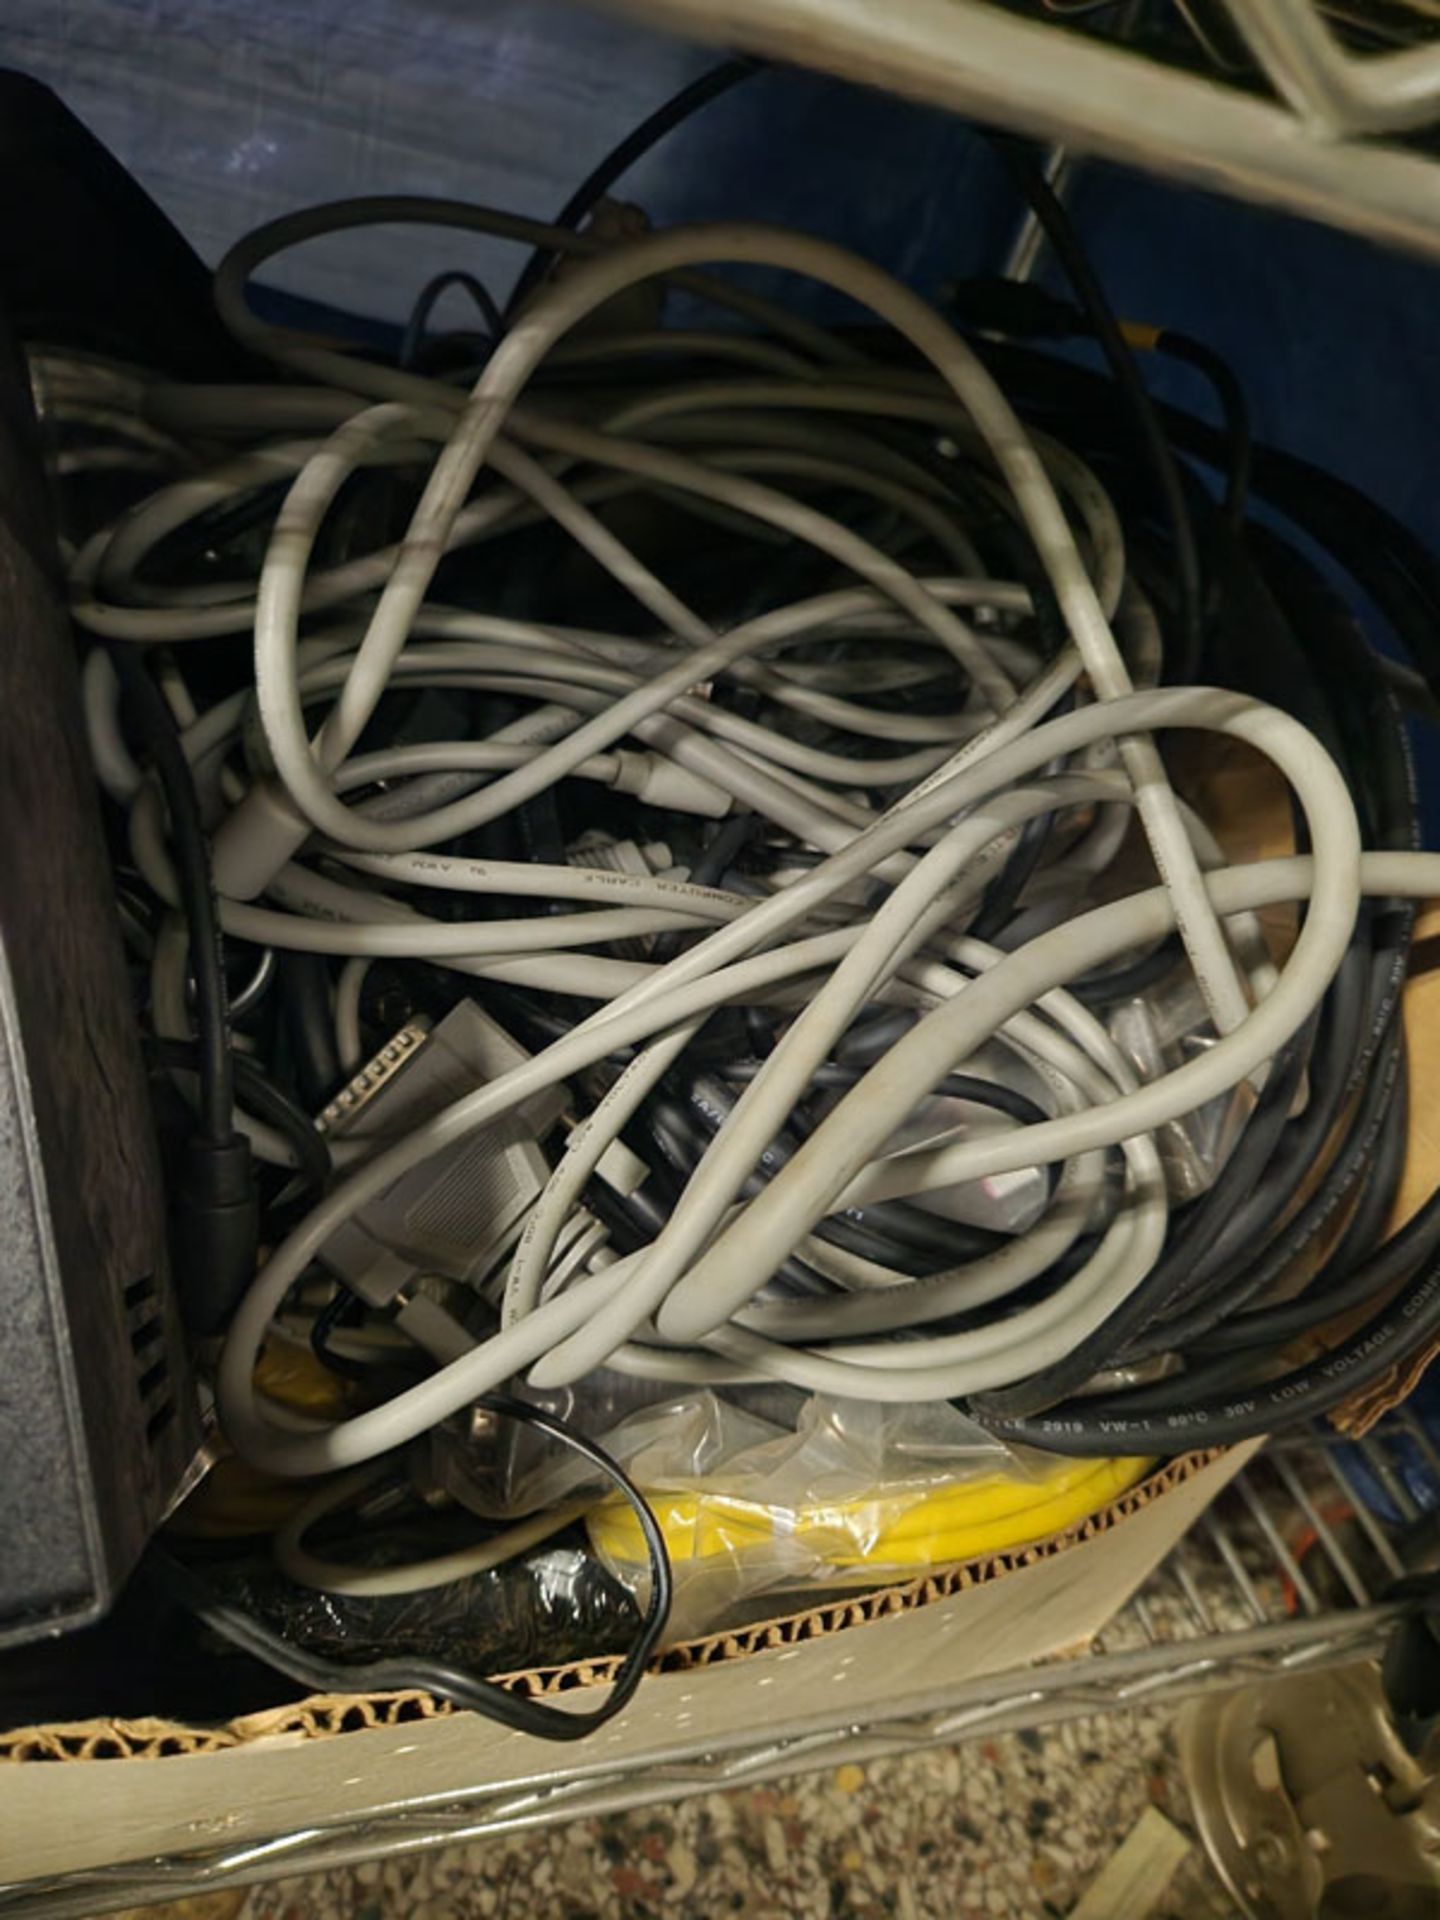 VIDEO DISTRIBUTION AMPLIFIER AND MISCELLANOUS CORDS IN BOX - Image 3 of 3